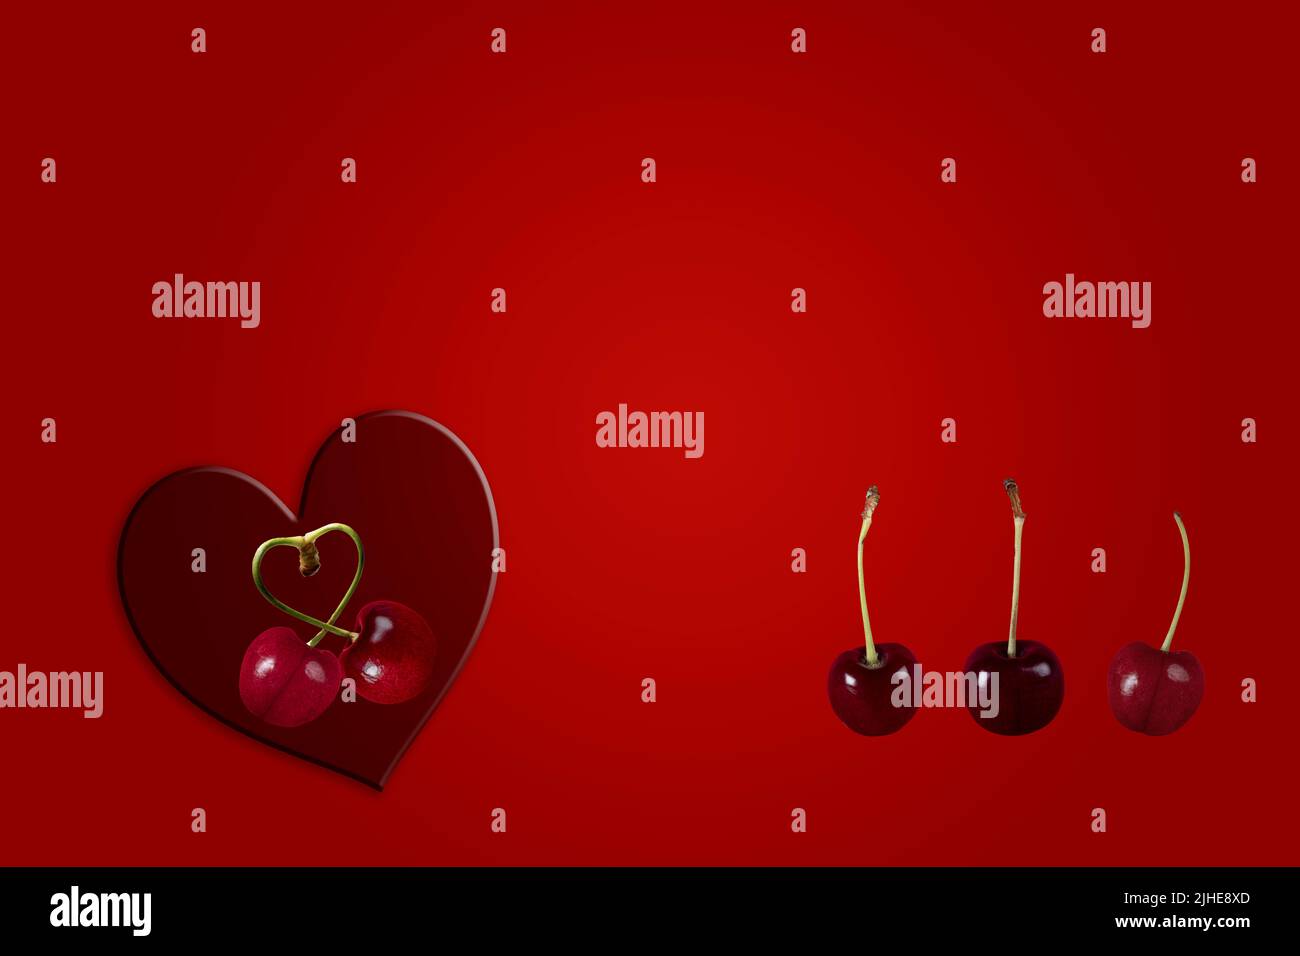 single couple love cherries cherry fruit concept image with row line of cherries & heart on a colorful colourful red background Stock Photo